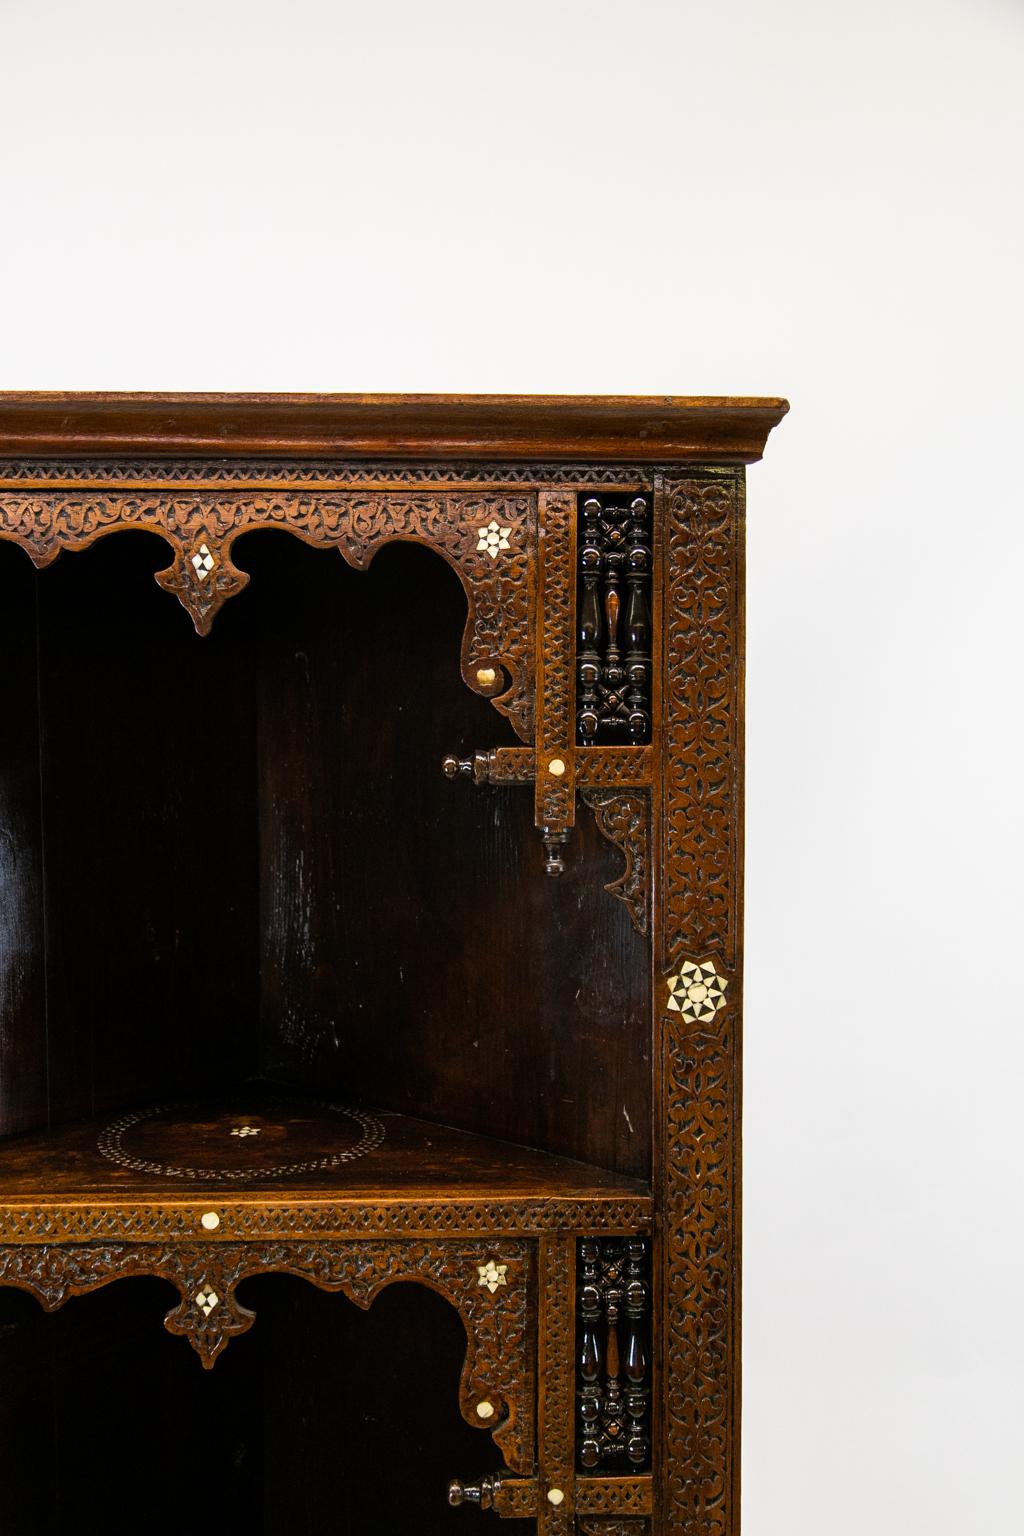 Moroccan inlaid corner cupboard, the front and shelves are profusely carved with geometric and stylized arabesque designs. It is inlaid with mother of pearl stars, diamonds, and circles. There are three arched openings. The shelves are inlaid with a